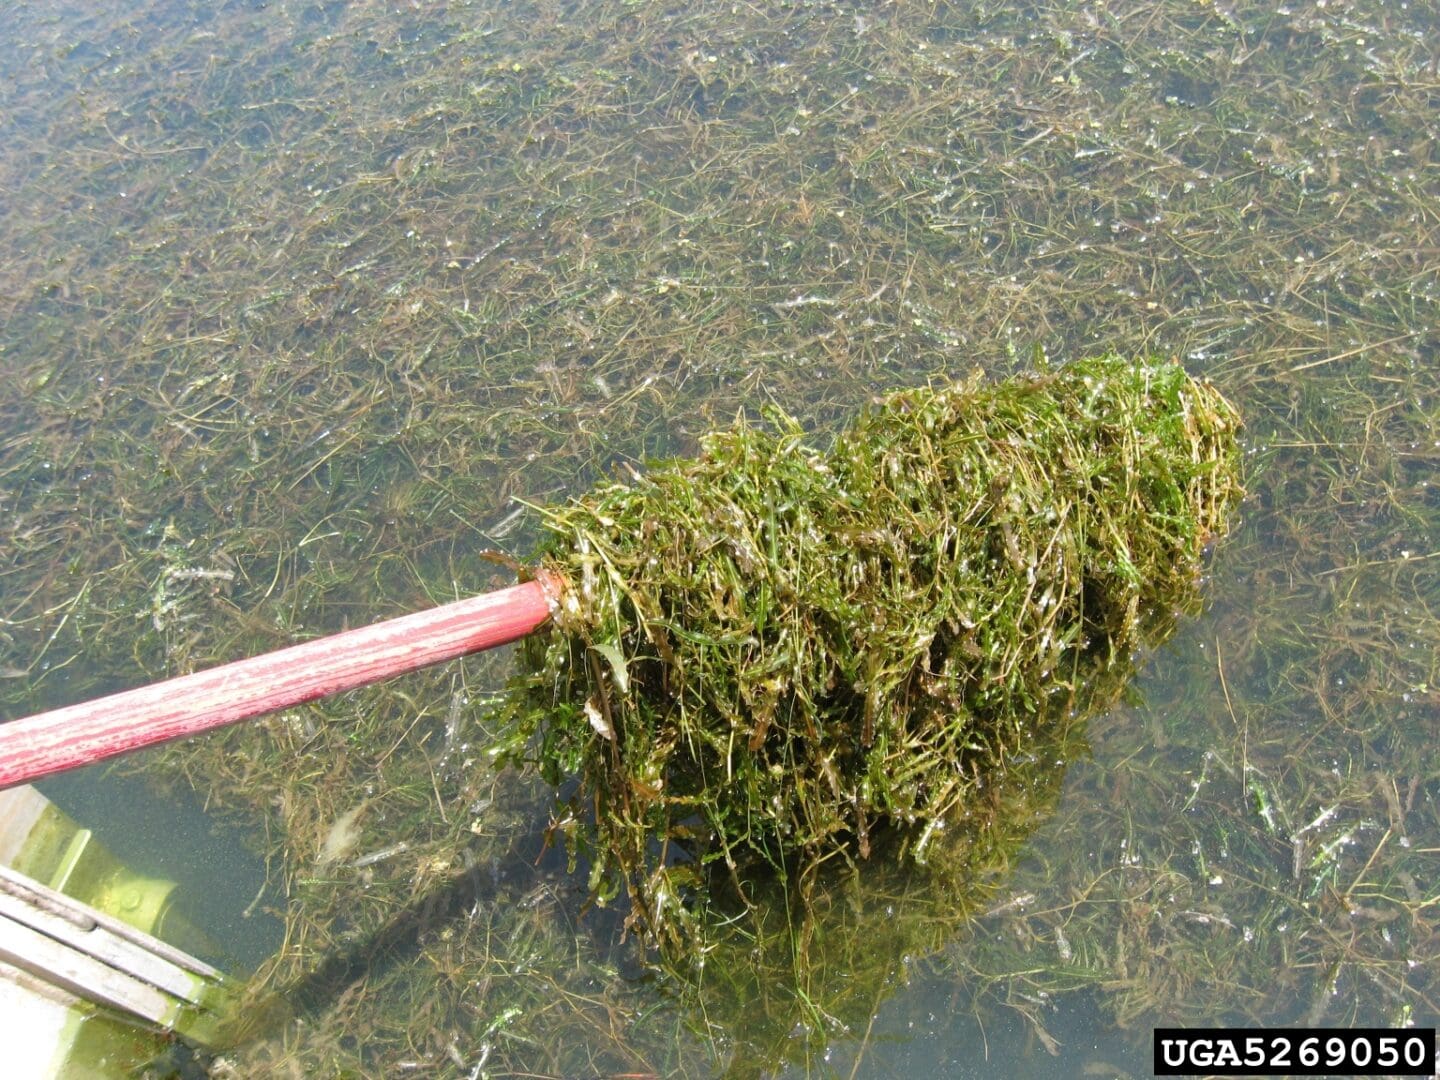 A stick with grass on it in the water.